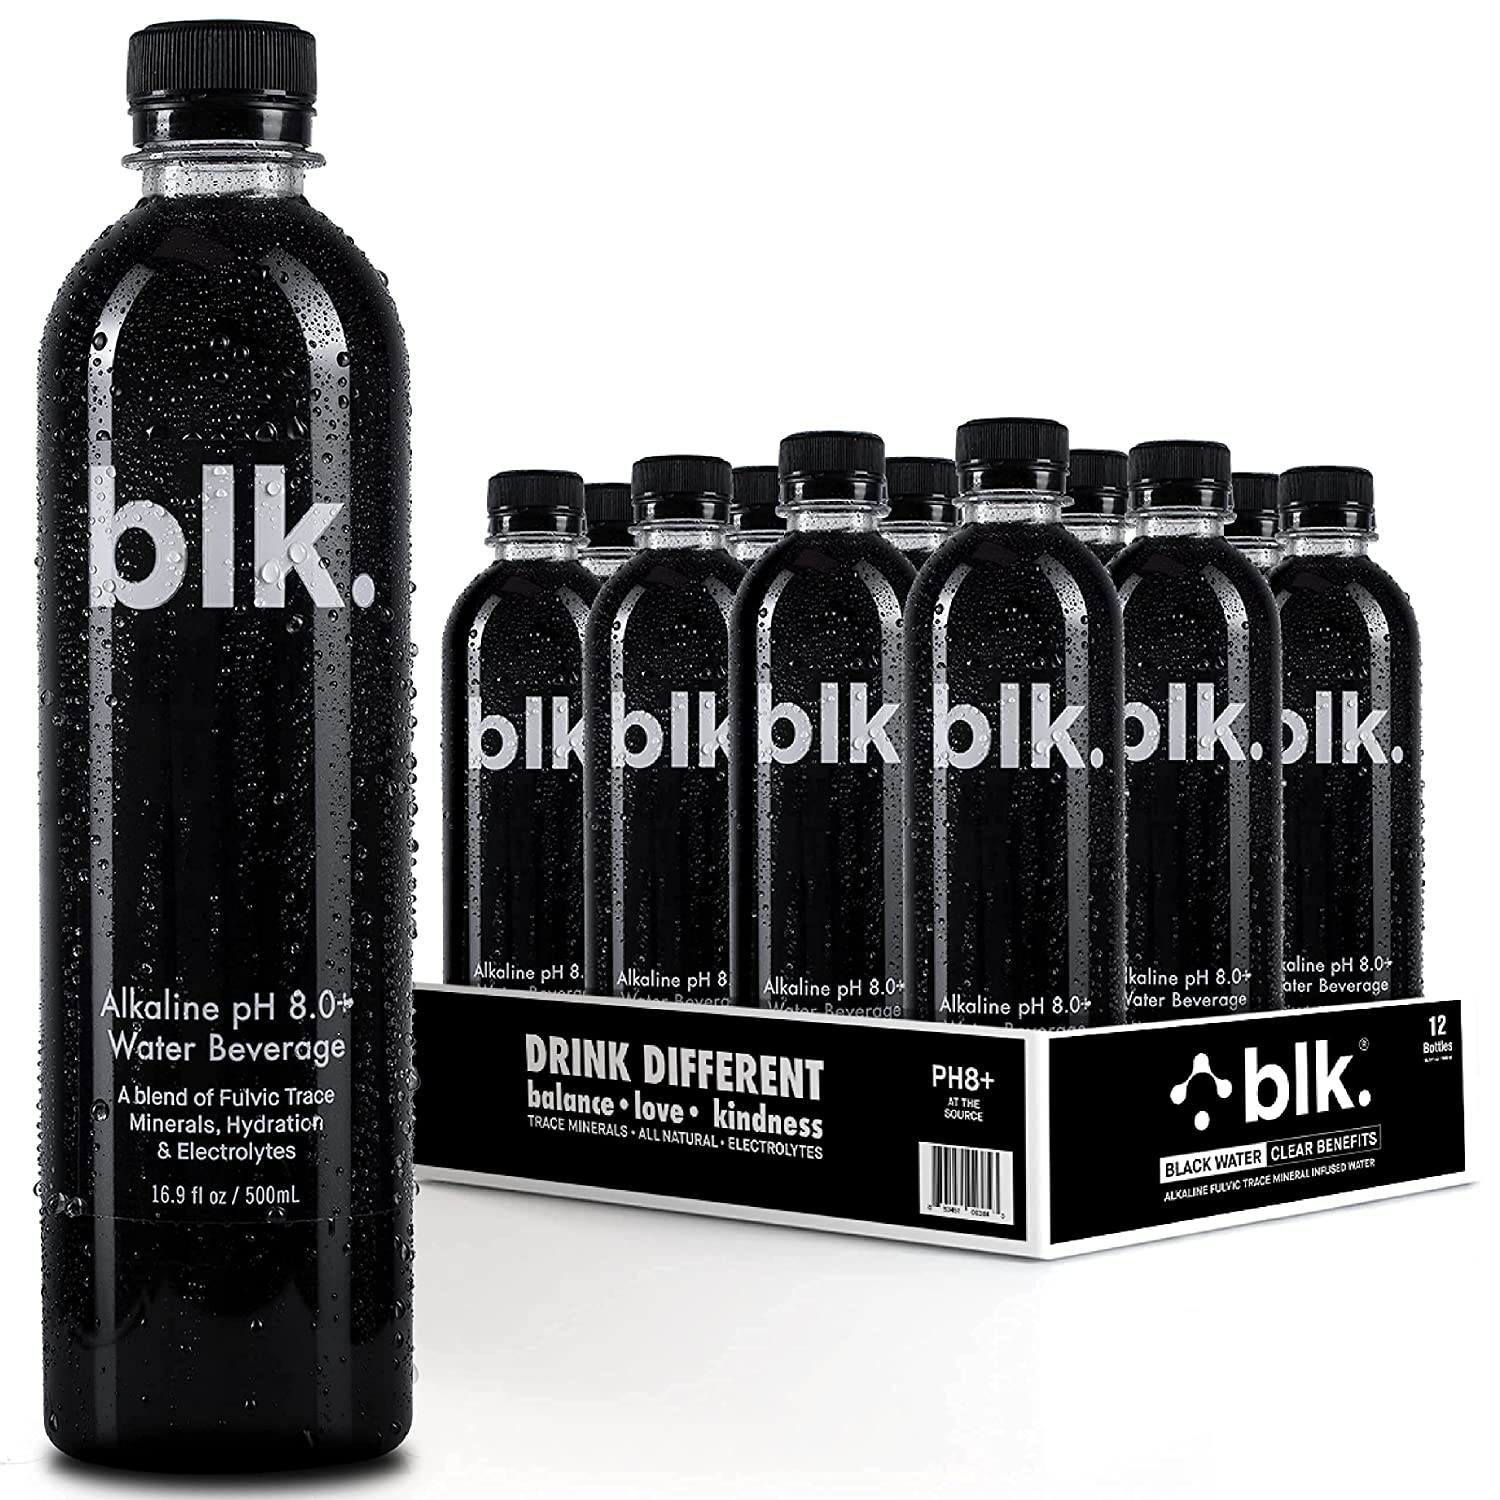 https://discounttoday.net/wp-content/uploads/2022/02/blk.-Natural-Mineral-Alkaline-Water-ph8-Bioavailable-Fulvic-Humic-Acid-Extract-16.9oz-12pk.jpg